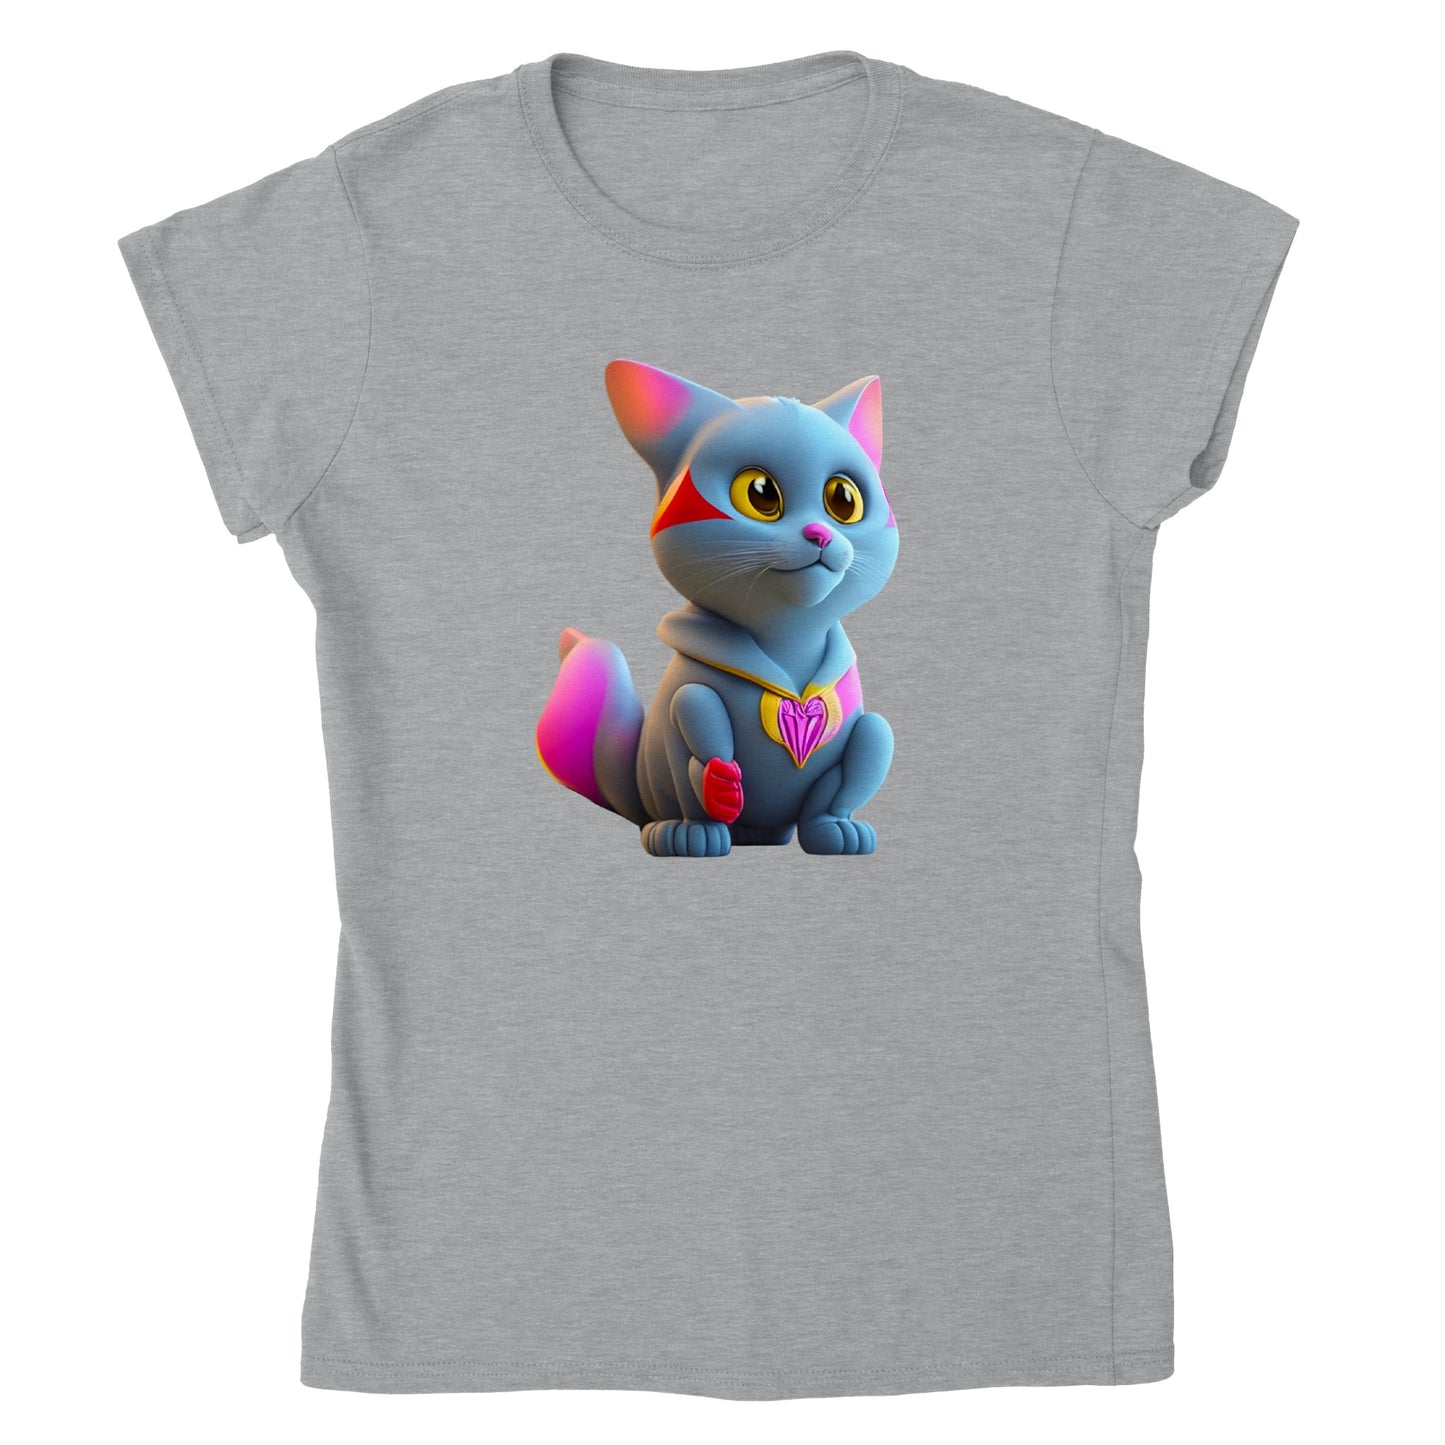 Adorable, Cool, Cute Cats and Kittens Toy - Classic Women’s Crewneck T-Shirt 63